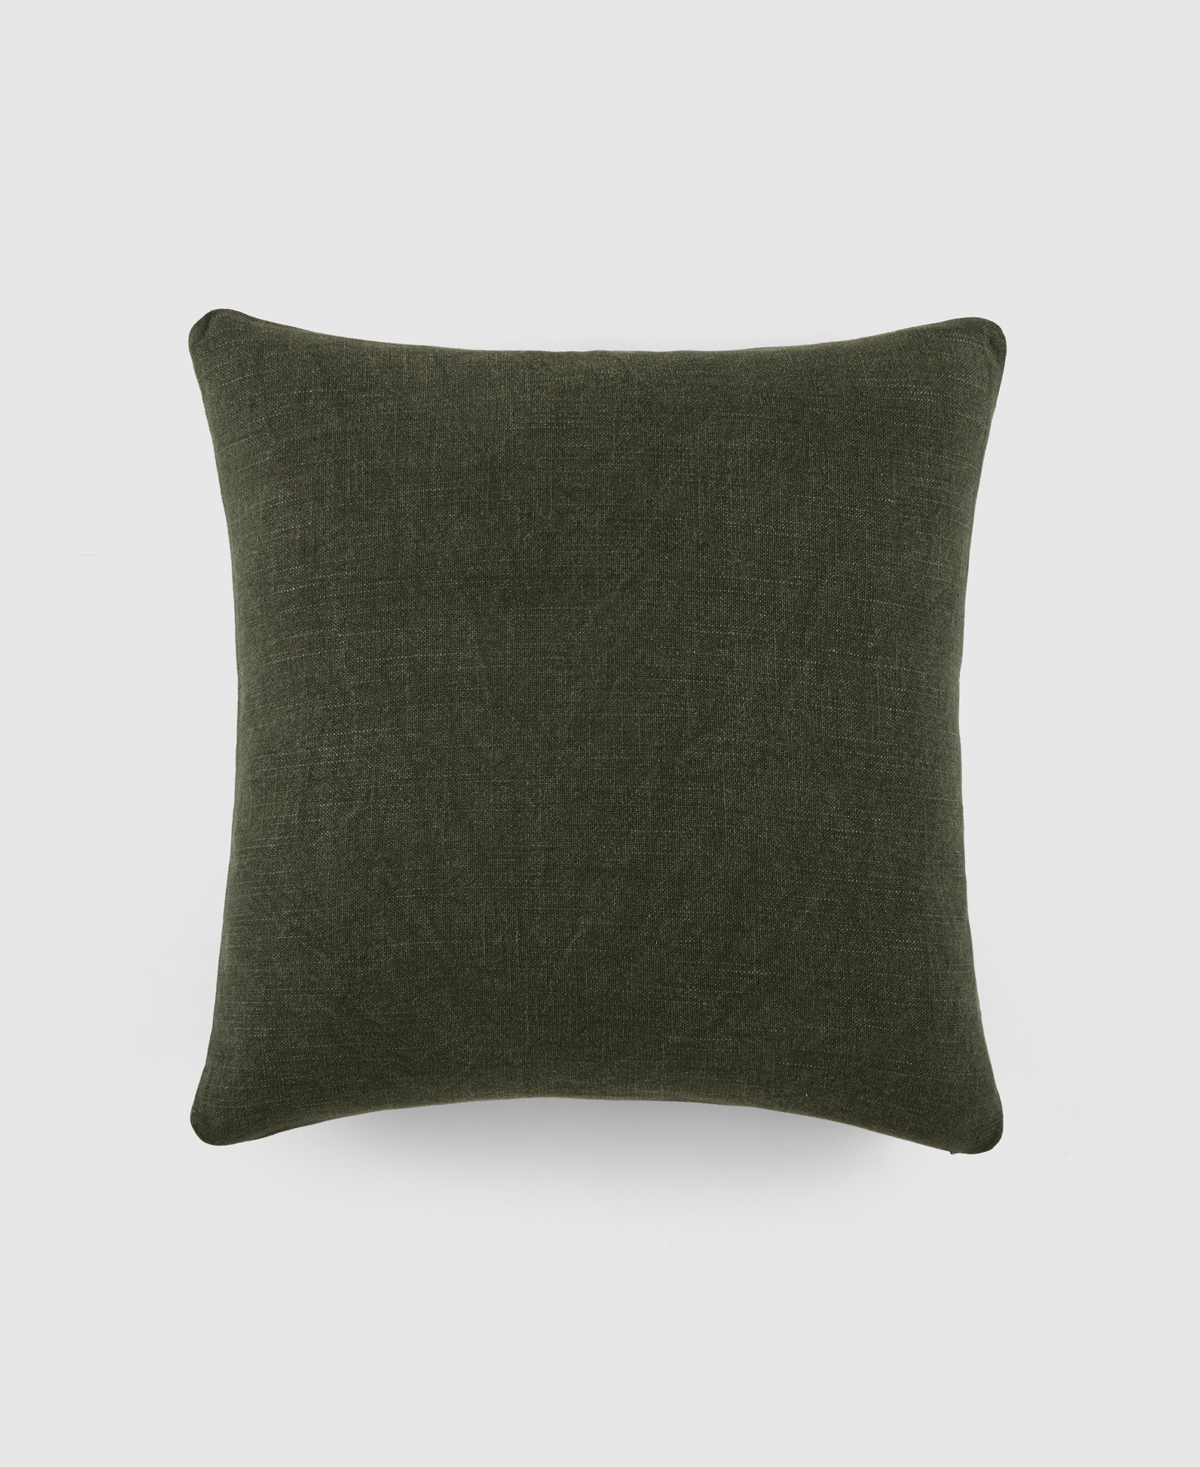 Ienjoy Home Washed And Distressed Decorative Pillow, 20" X 20" In Olive